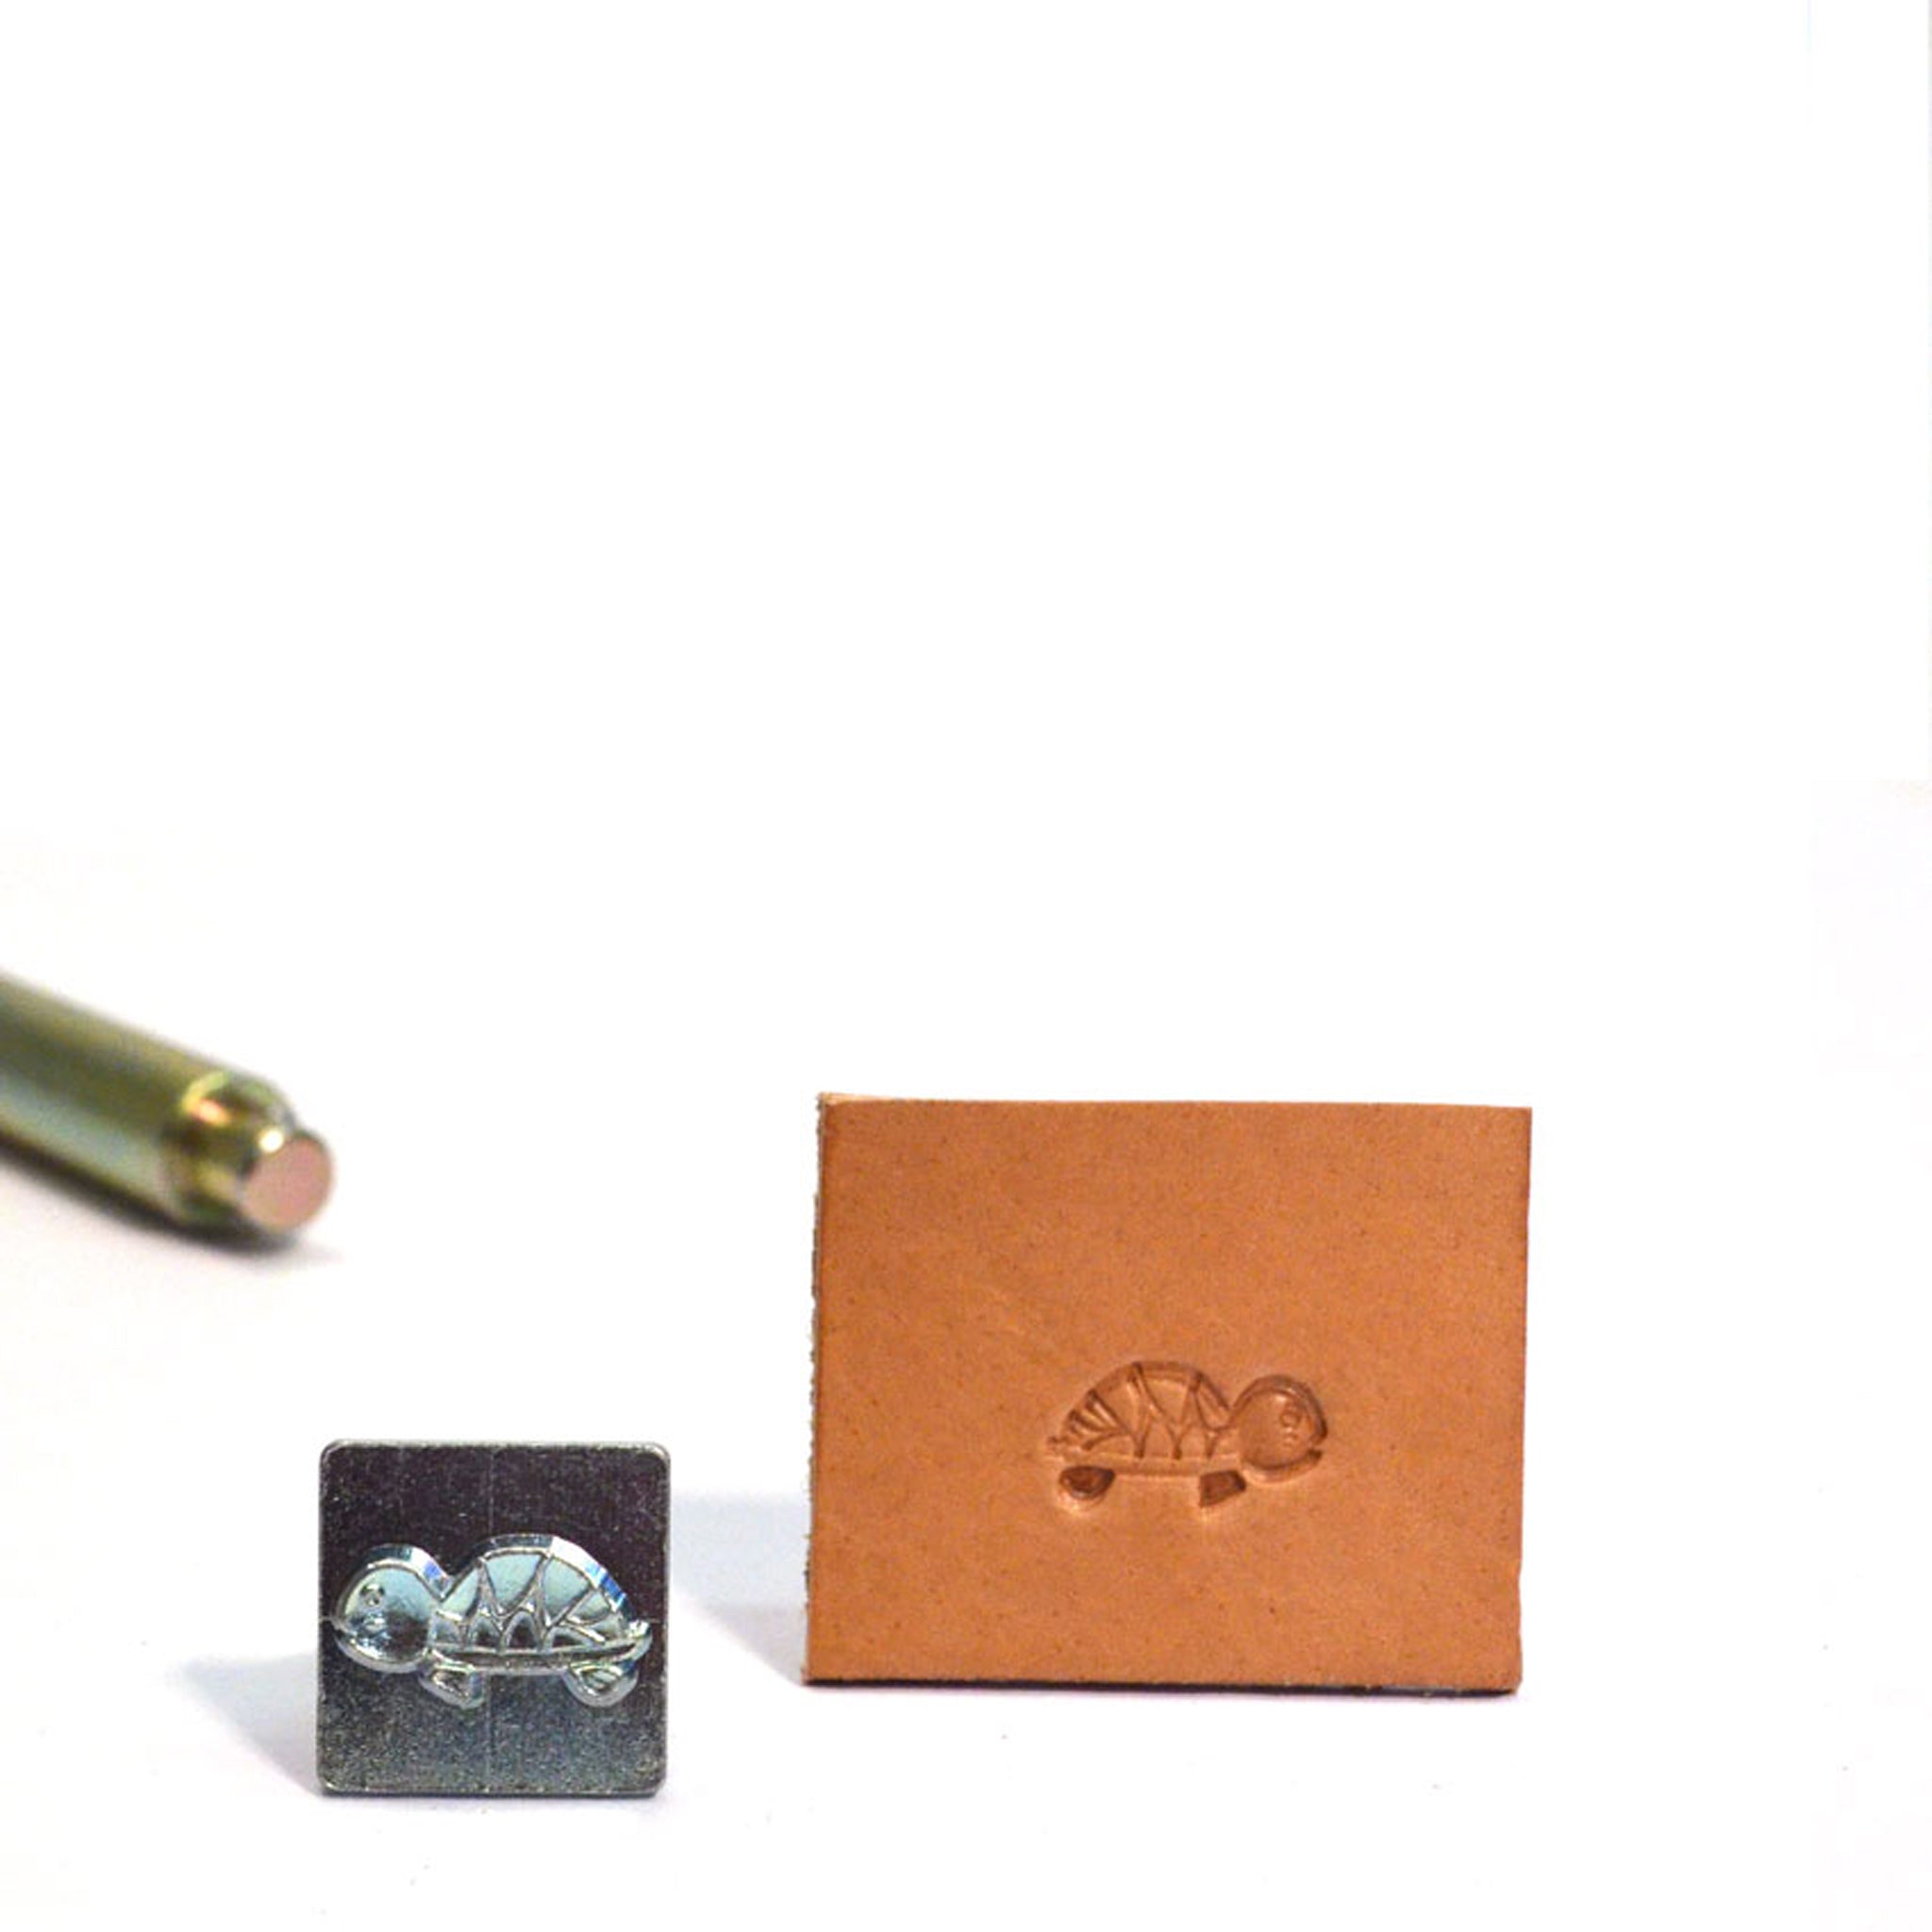 Turtle/Tortoise Mini 3D Embossing Stamp from Identity Leathercraft